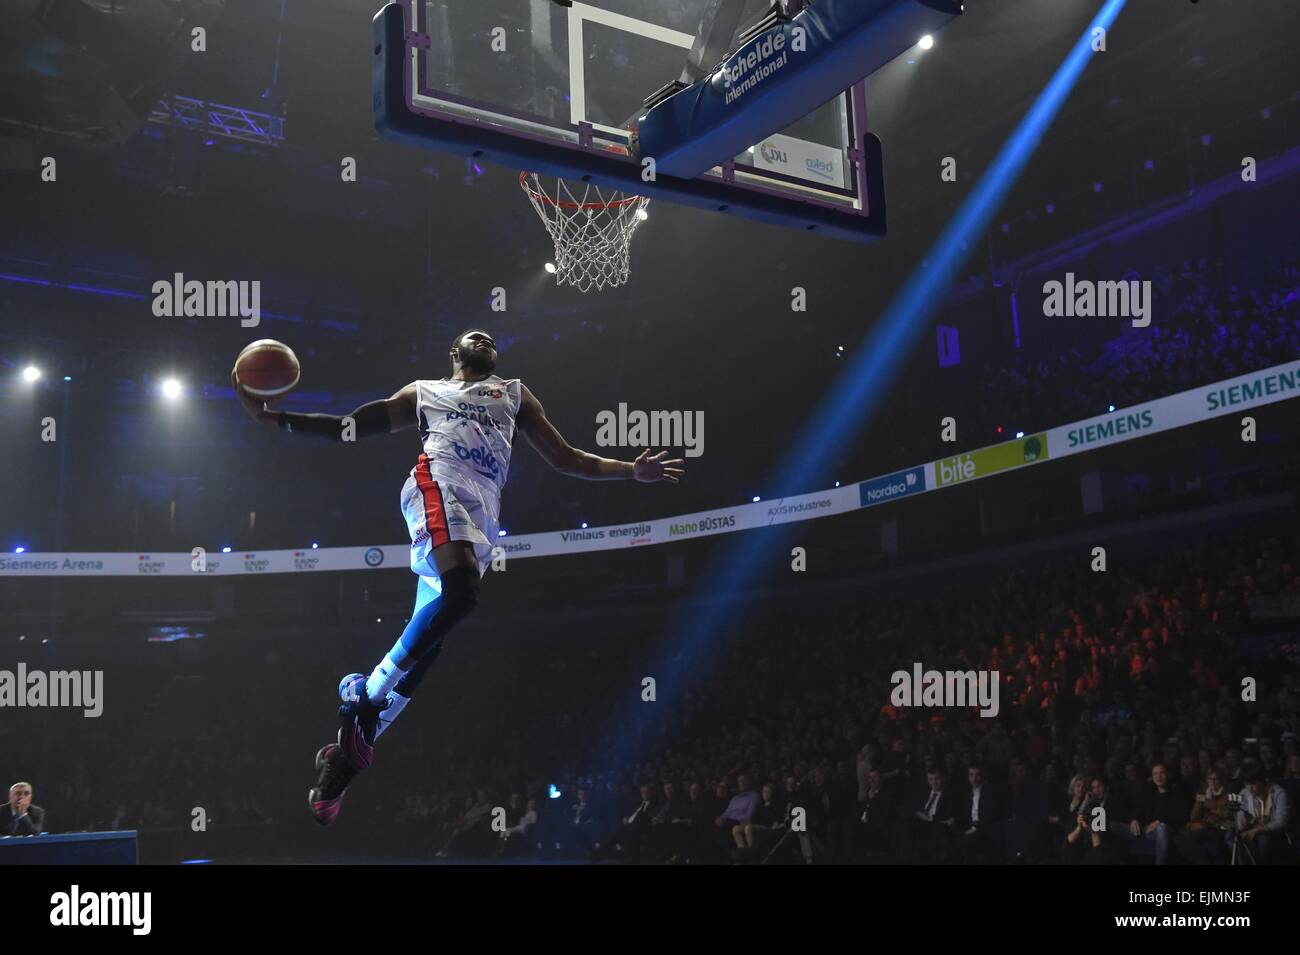 Vilnius, Lithuania. 29th Mar, 2015. Travis Leslie of the U.S. does slam dunk during the All Star game in Vilnius, Lithuania, on March 29, 2015. The Lithuanian Basketball League held an All Star game on Sunday. Travis Leslie won the MVP of the 2015 All Star game. Credit:  Alfredas Pliadis/Xinhua/Alamy Live News Stock Photo